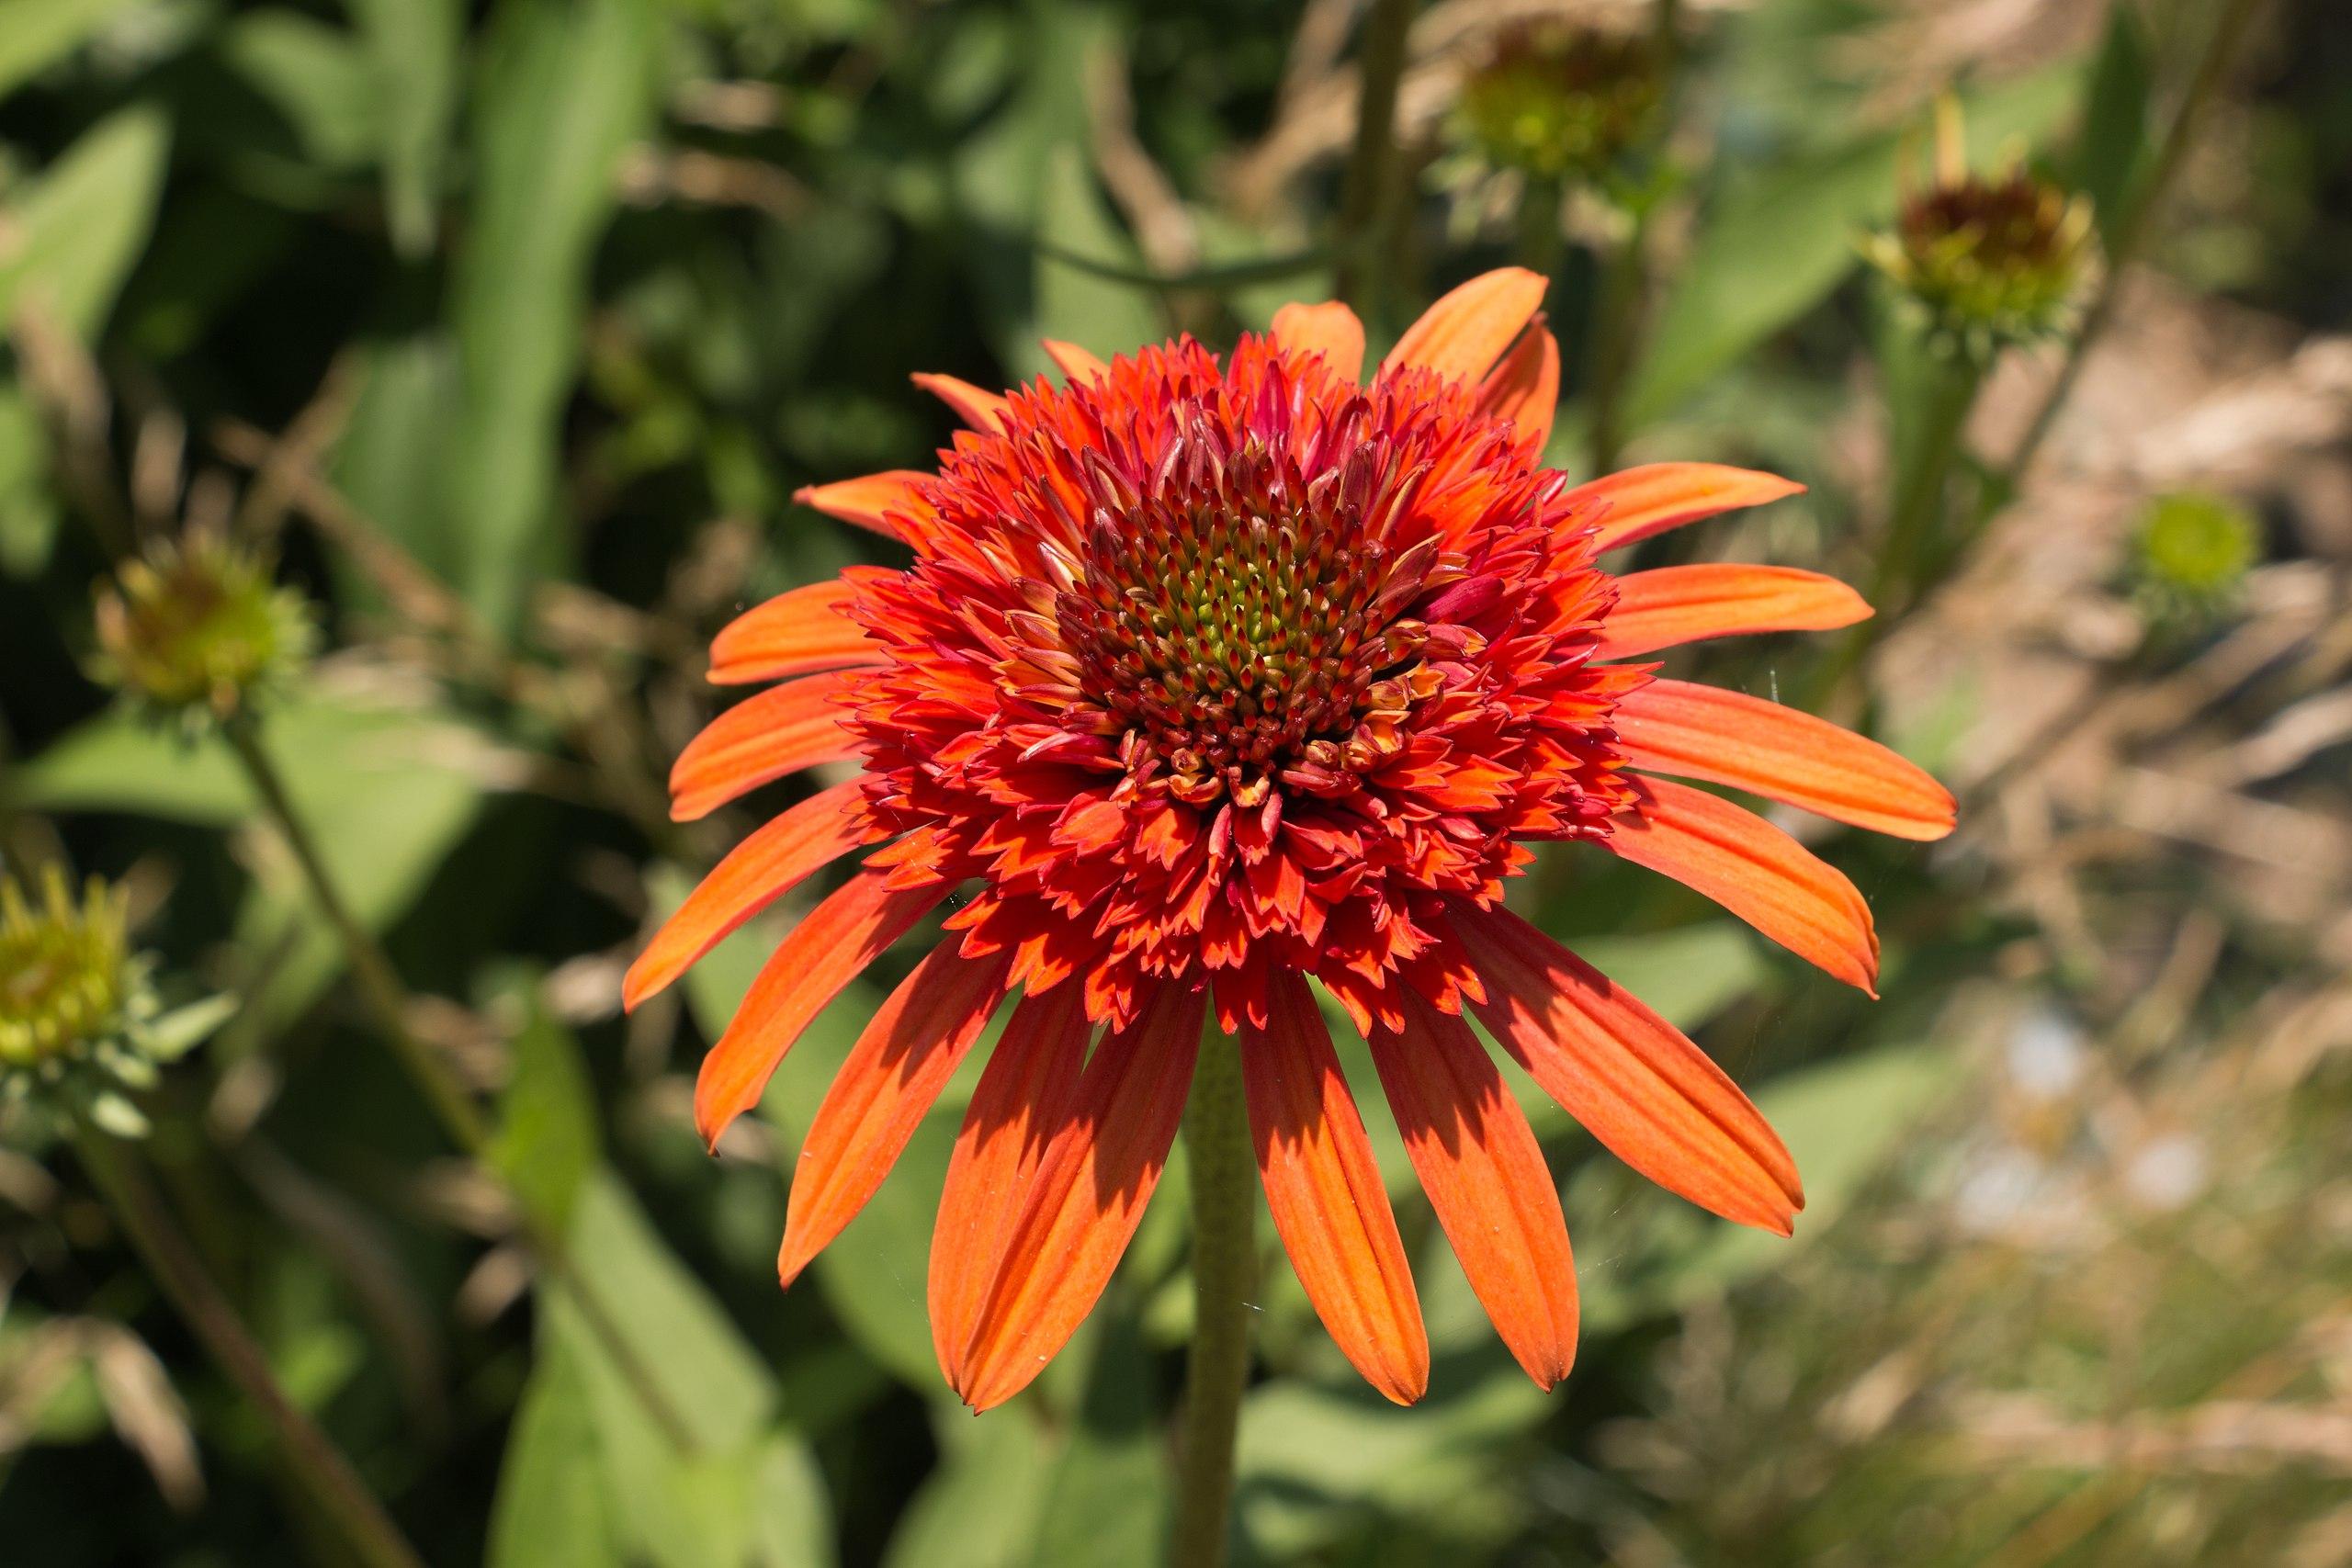 orange-red flowers with red-green center, green stems and leaves